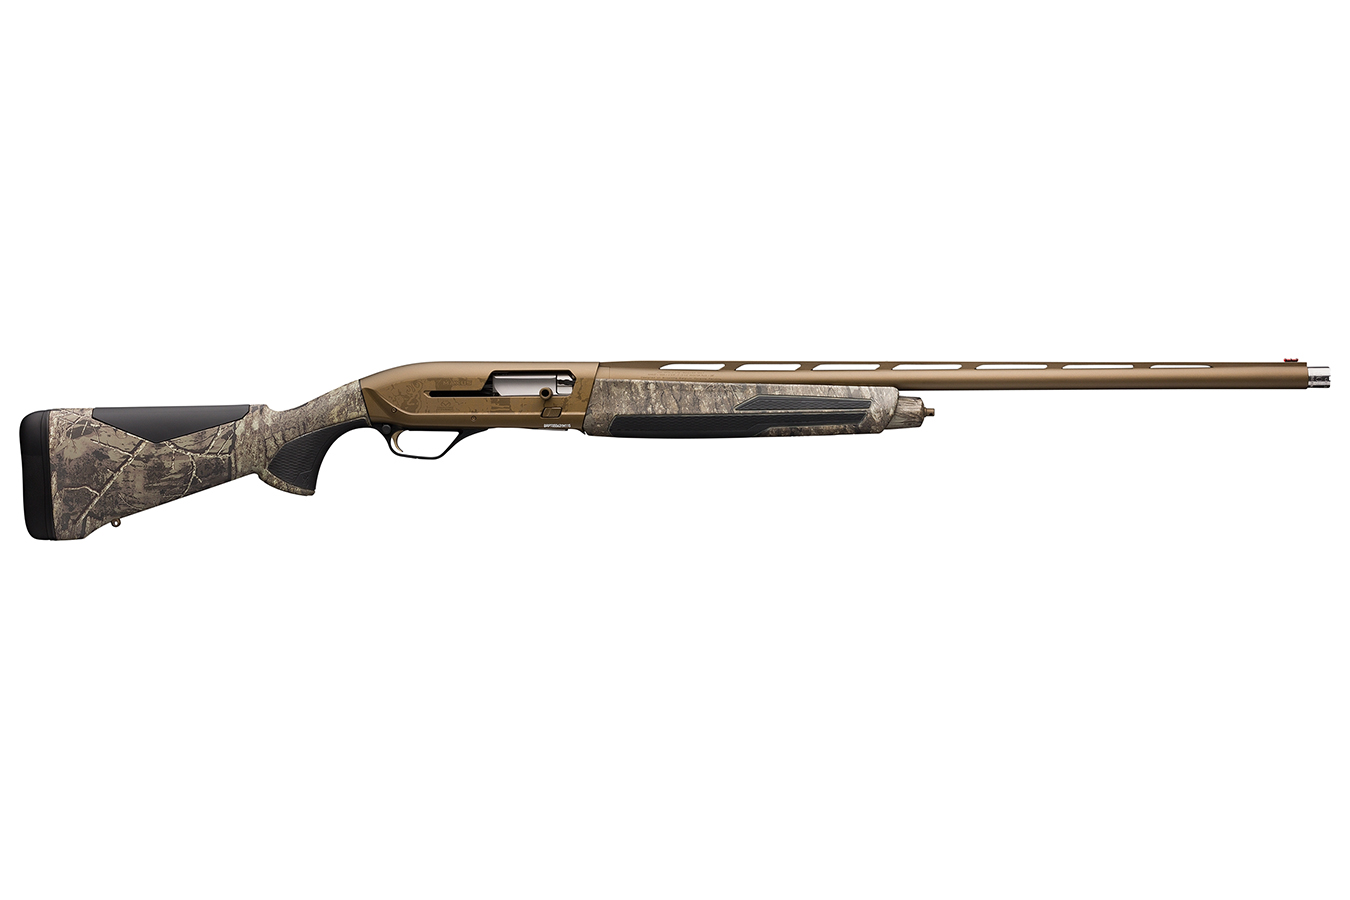 No. 17 Best Selling: BROWNING FIREARMS MAXUS II WICKED WING 12 GA 3.5 28` RT TIMBER